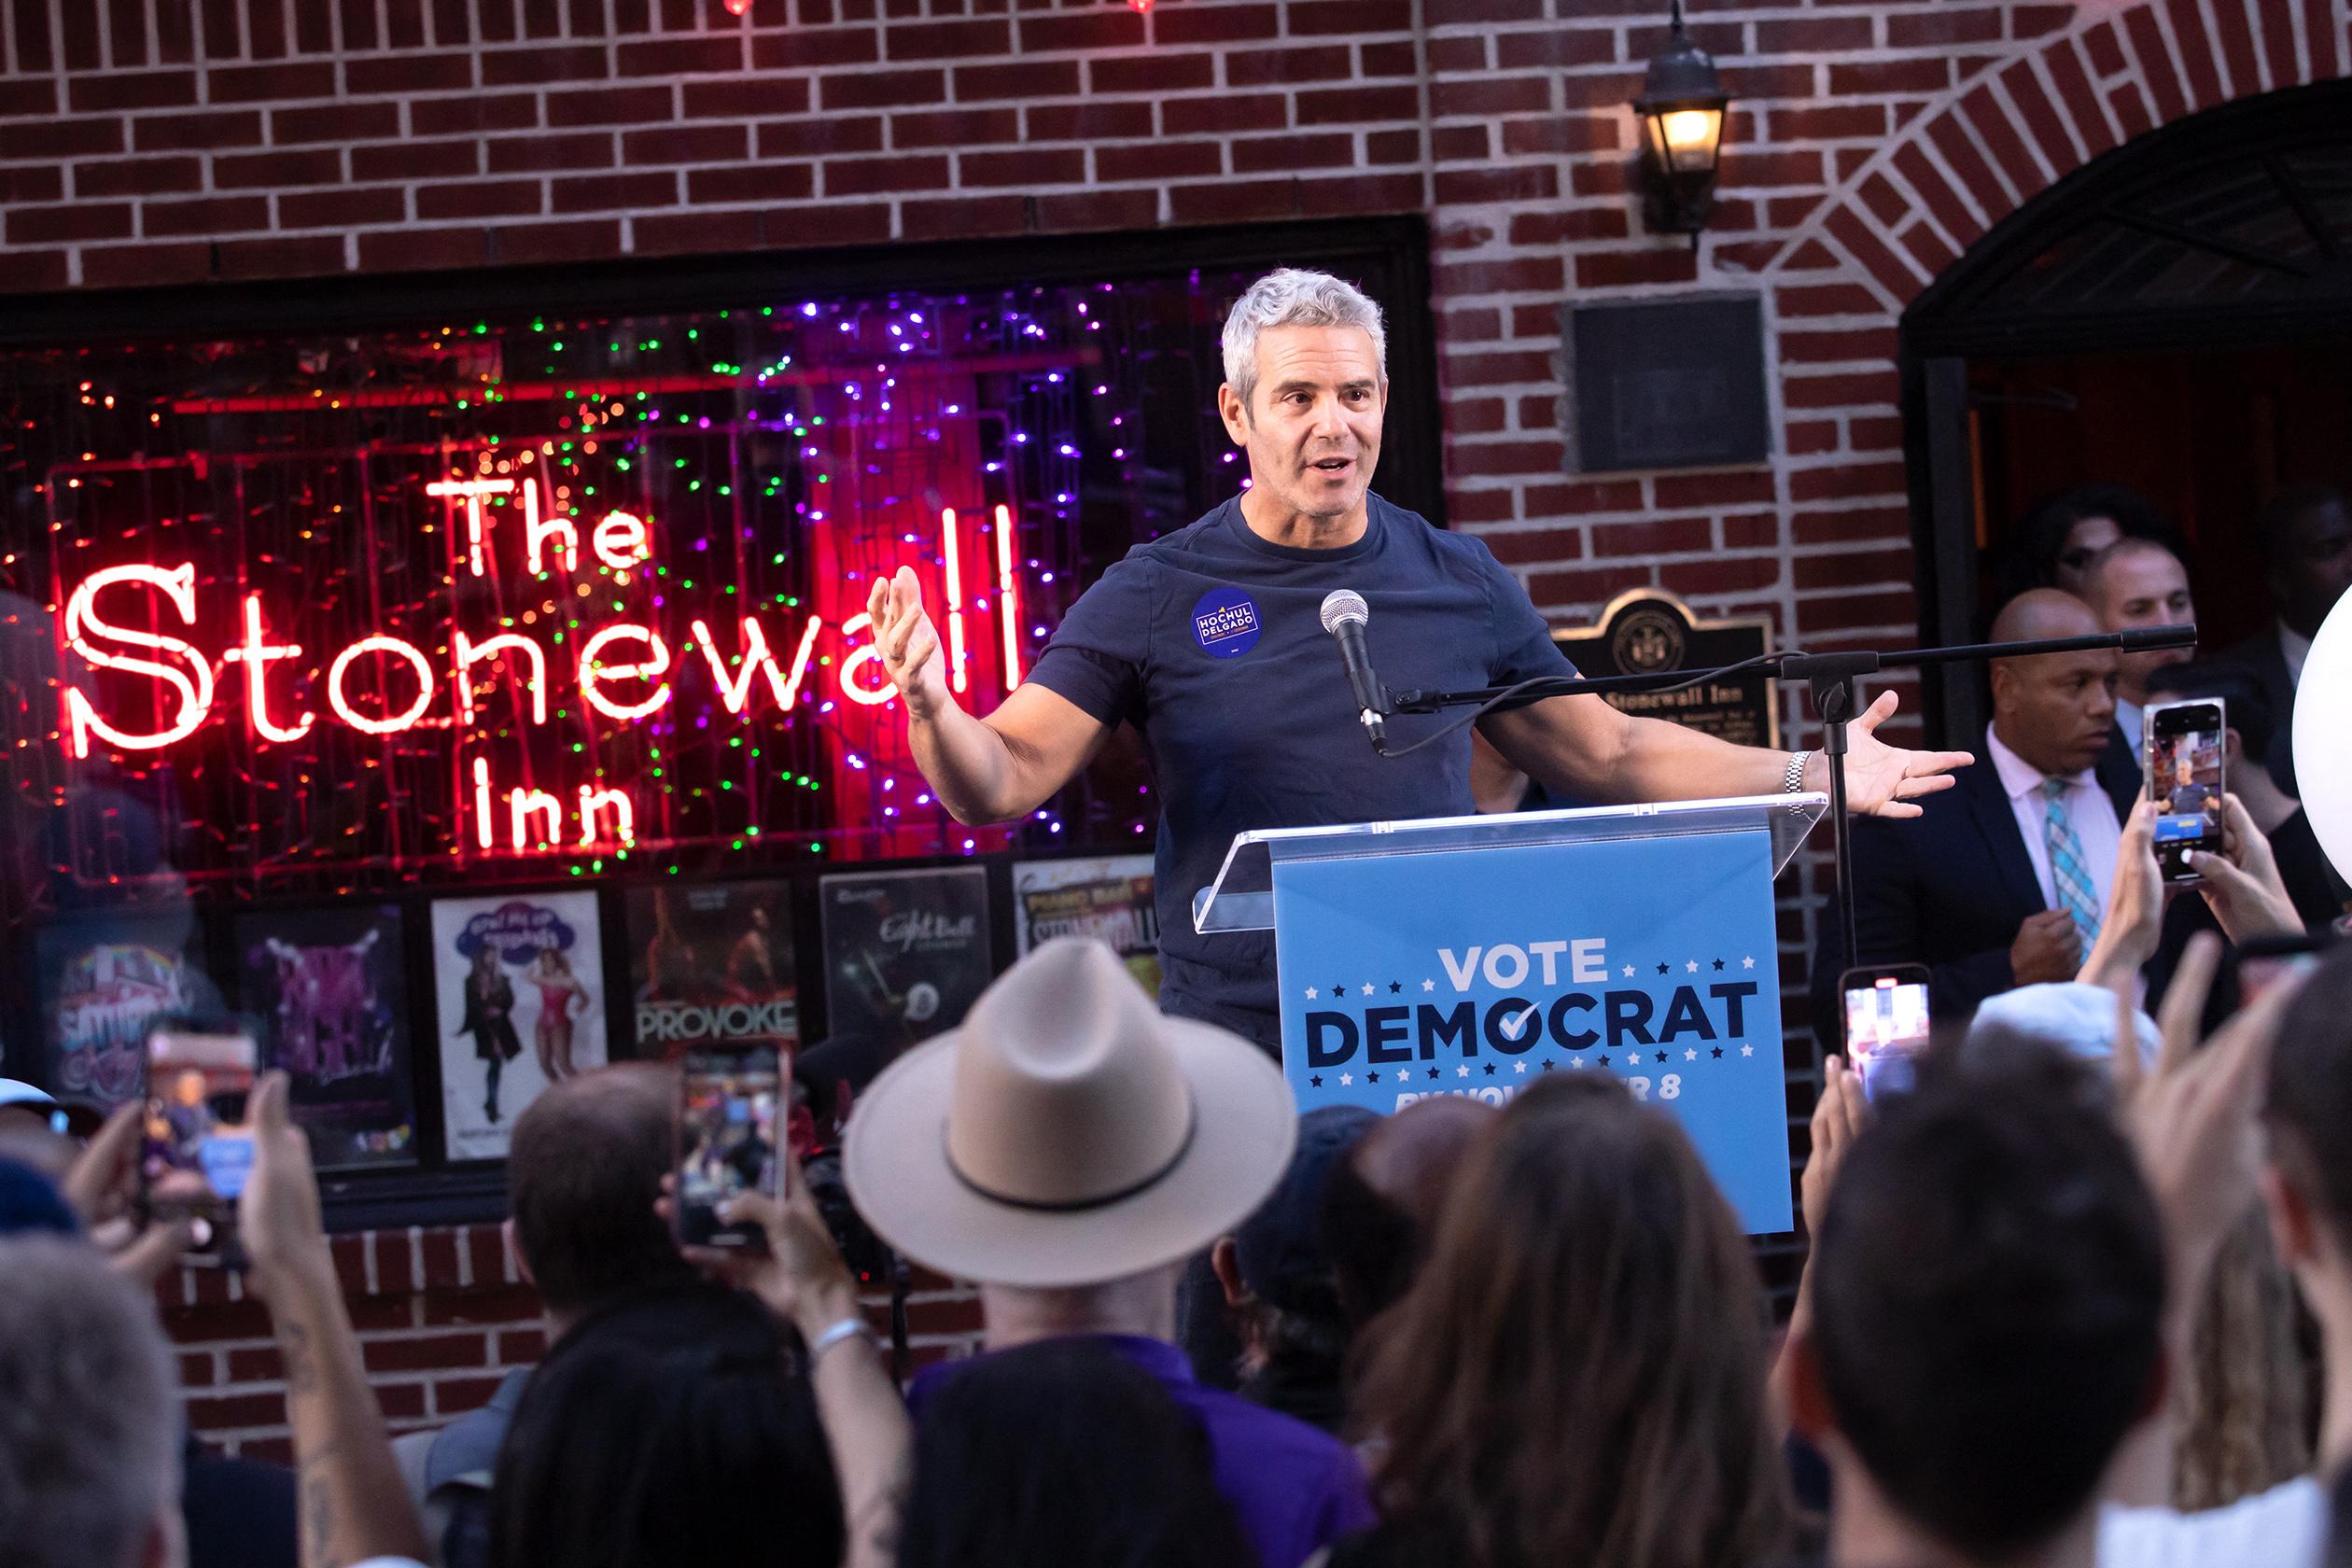 Governor Hochul Attends LGBTQ Rally at Stonewall Inn